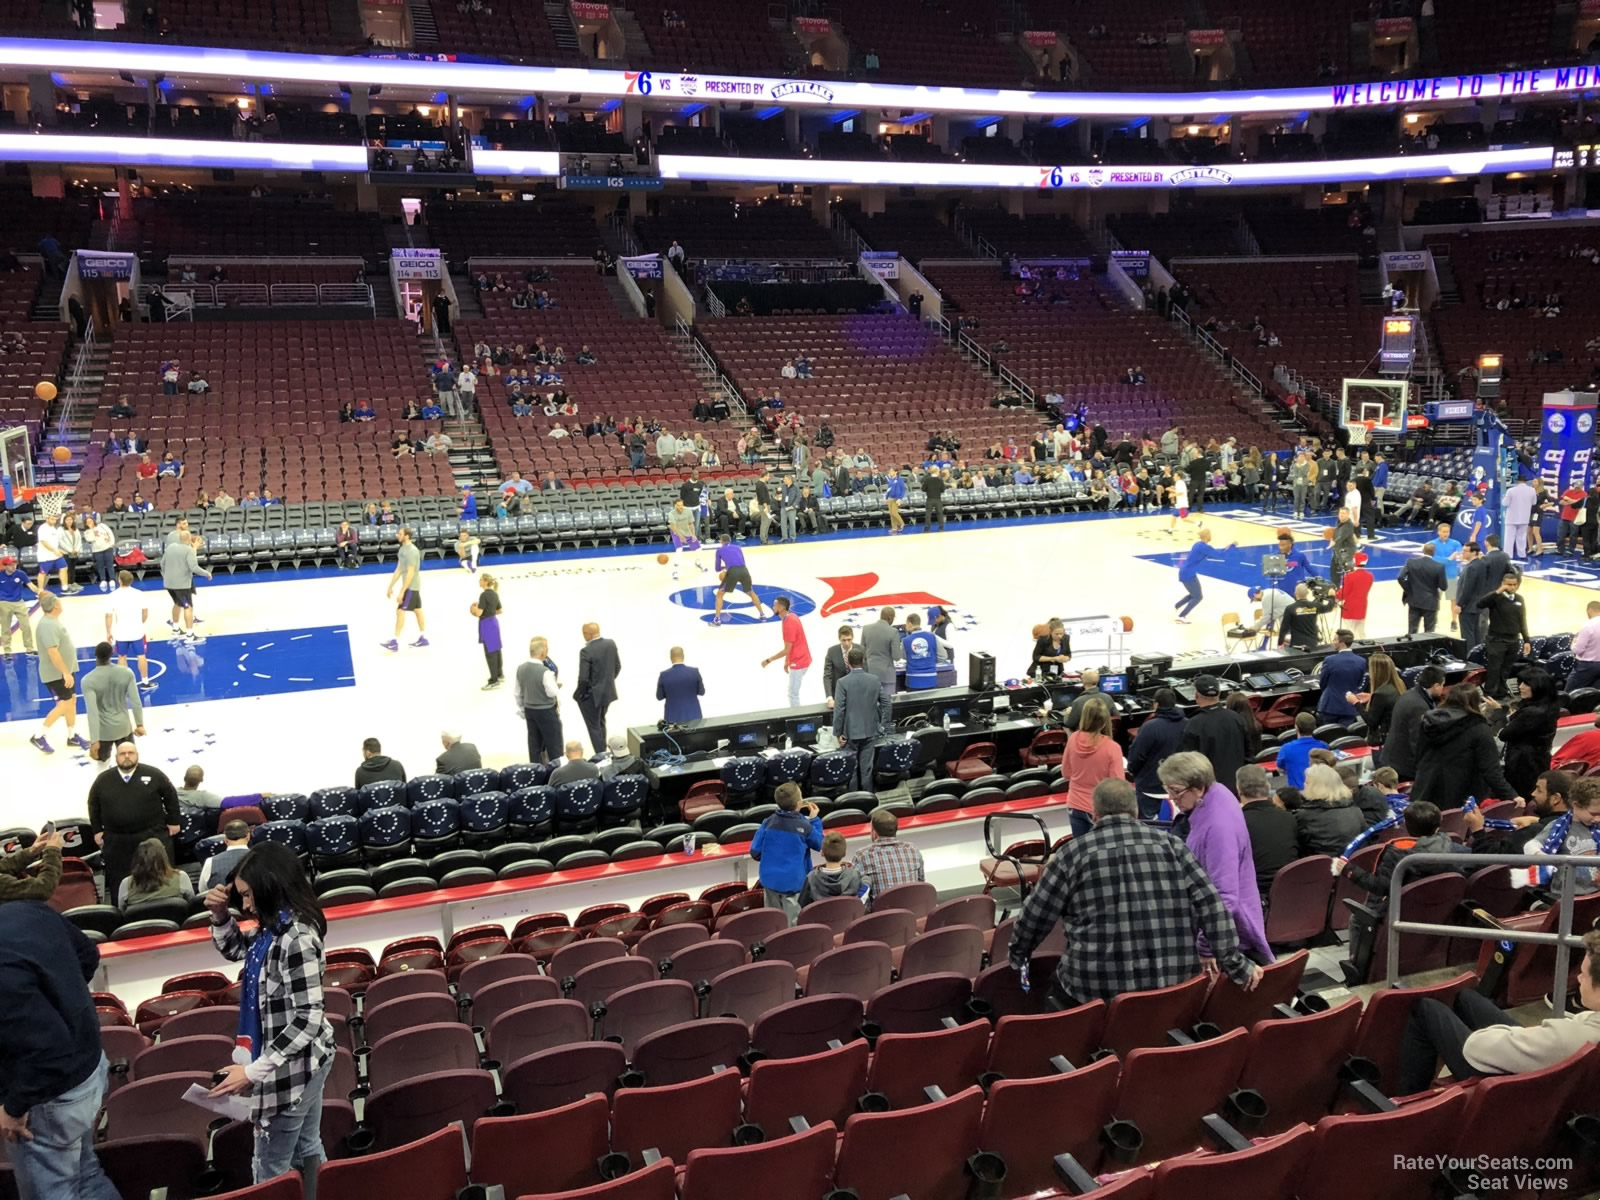 section 124, row 14 seat view  for basketball - wells fargo center